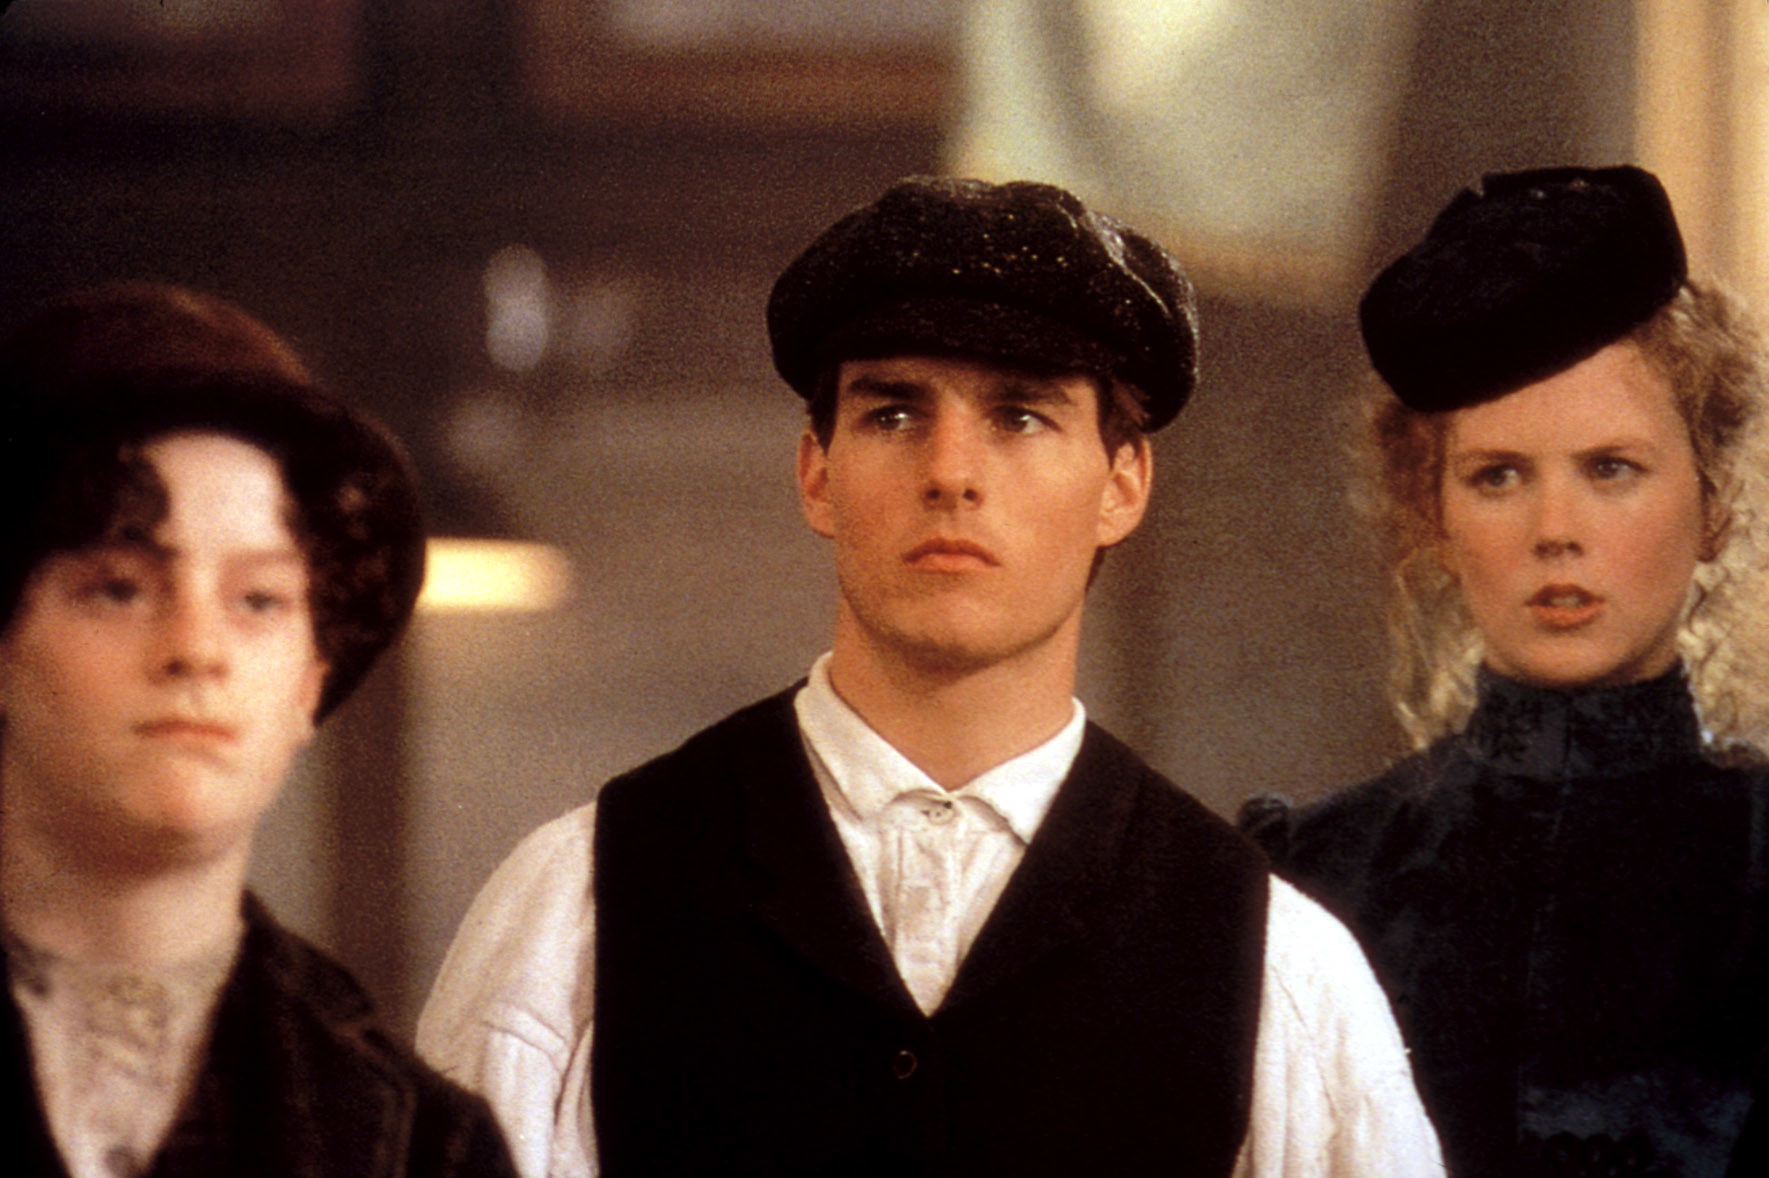 Cruise in a newsboy cap and vest with Kidman behind him and a boy in front